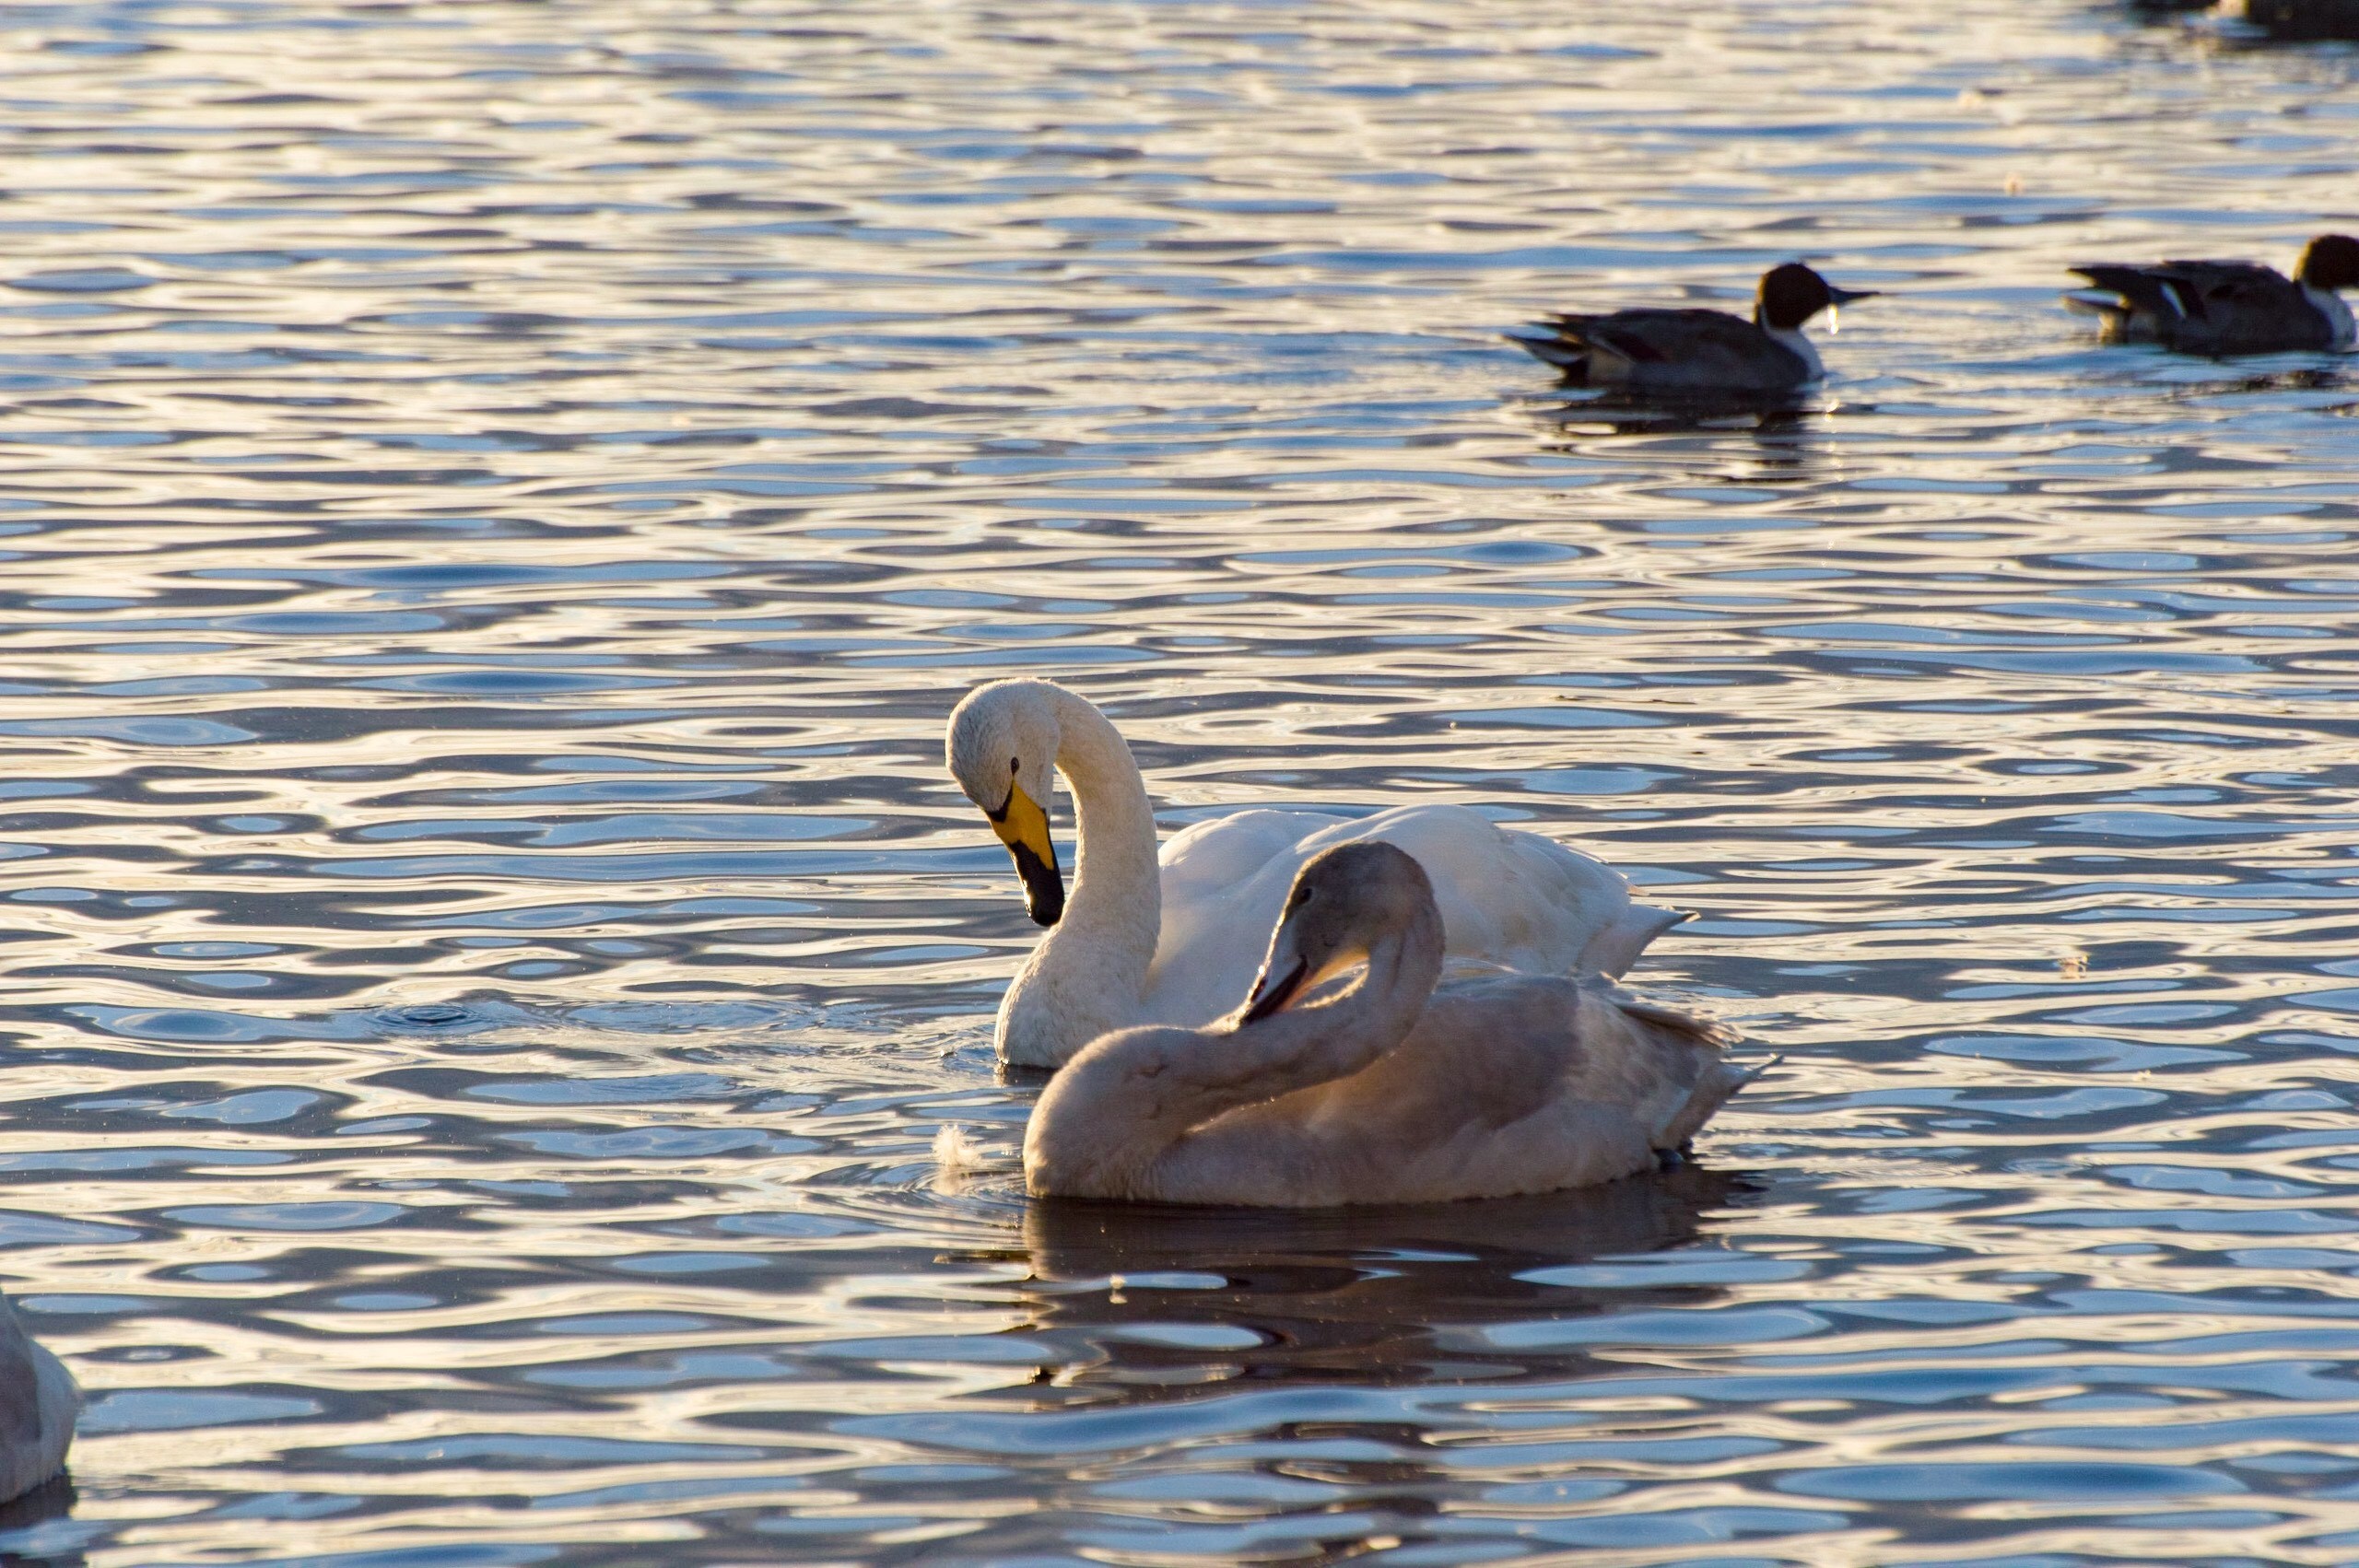 My life with whooper swans